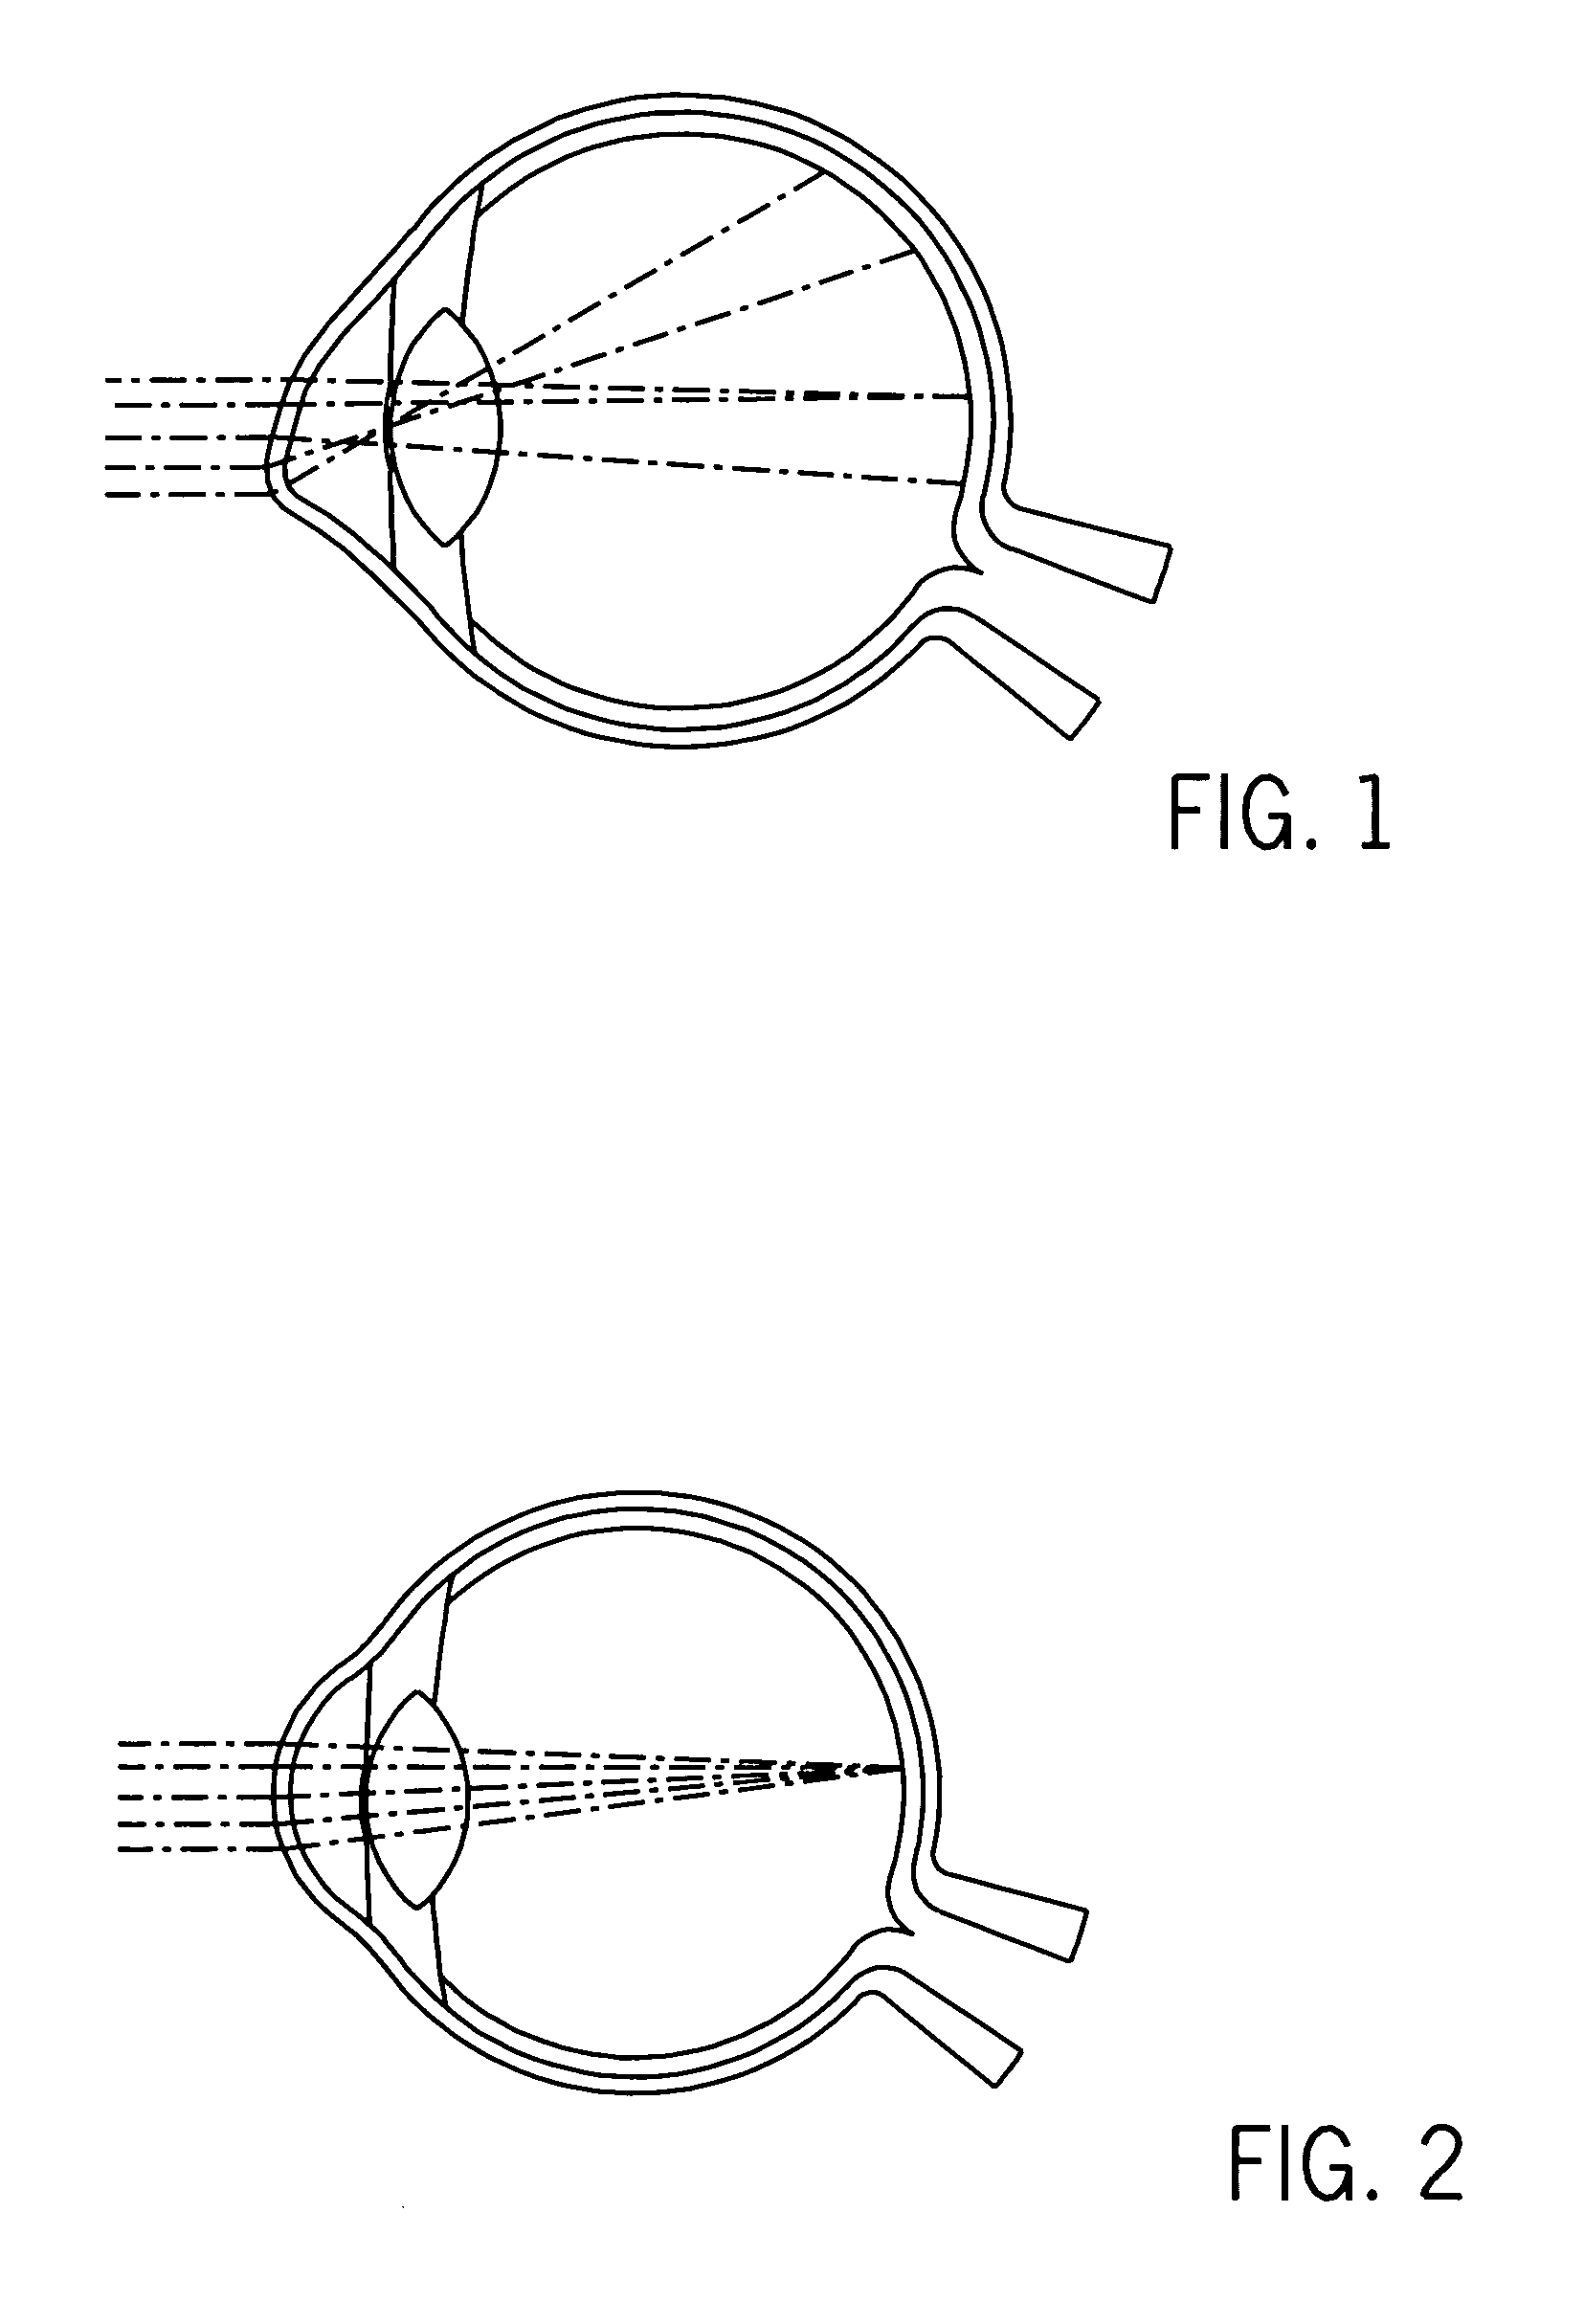 Pre-formed intrastromal corneal insert for corneal abnormalities or dystrophies